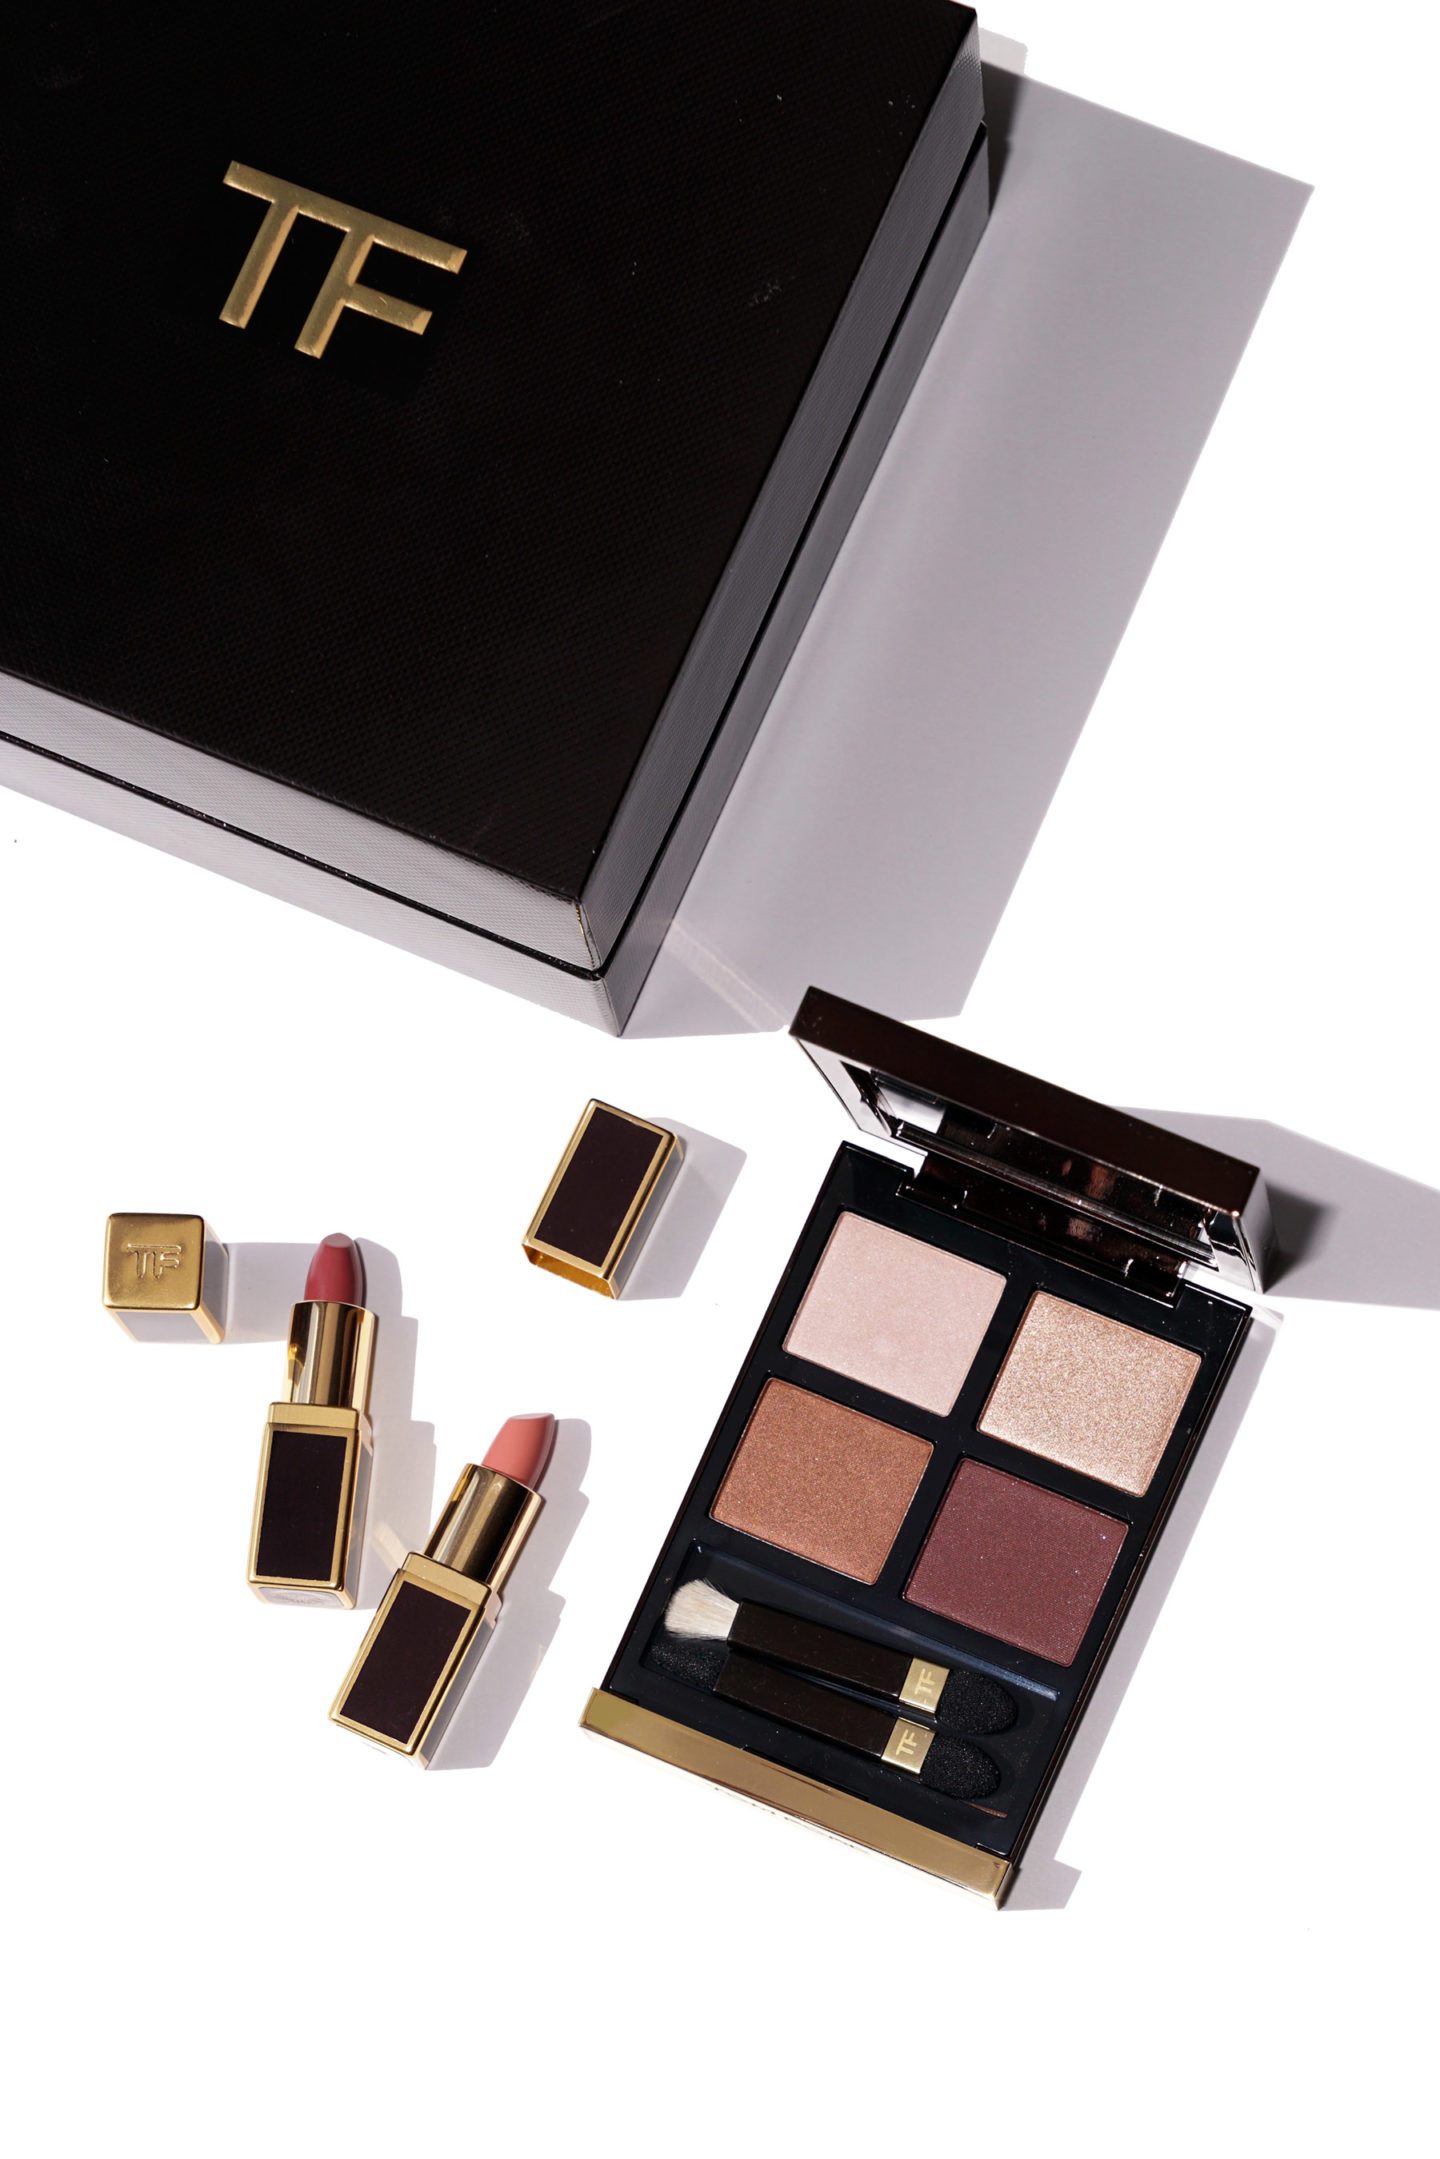 Tom Ford Iris Bronze Eye and Lip Set Nordstrom review + swatches | The Beauty Look Book